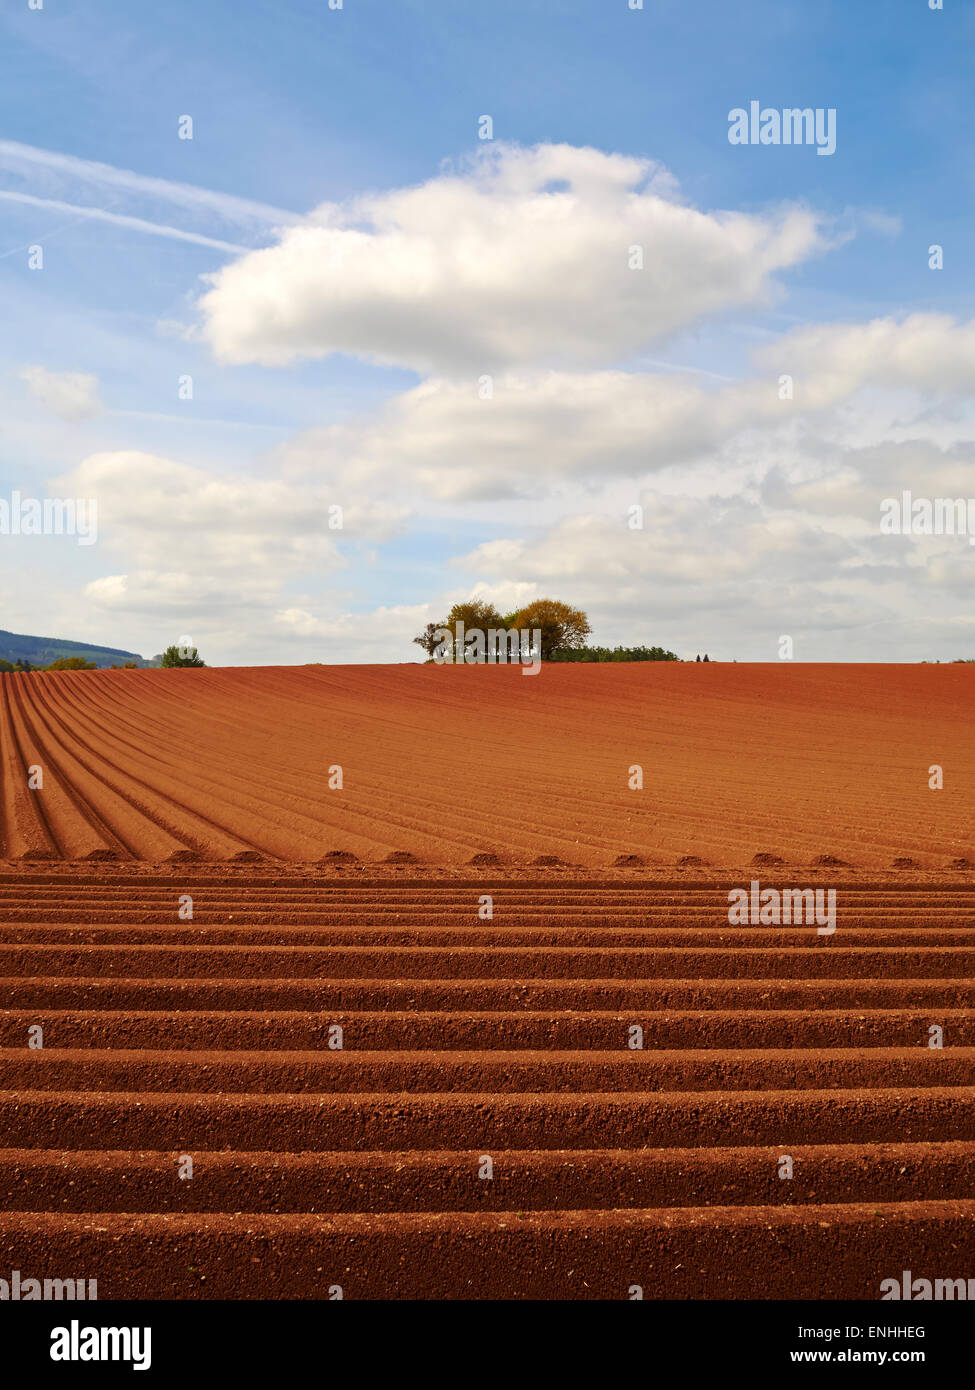 Ploughed red soil field, Shropshire, England, UK. Stock Photo